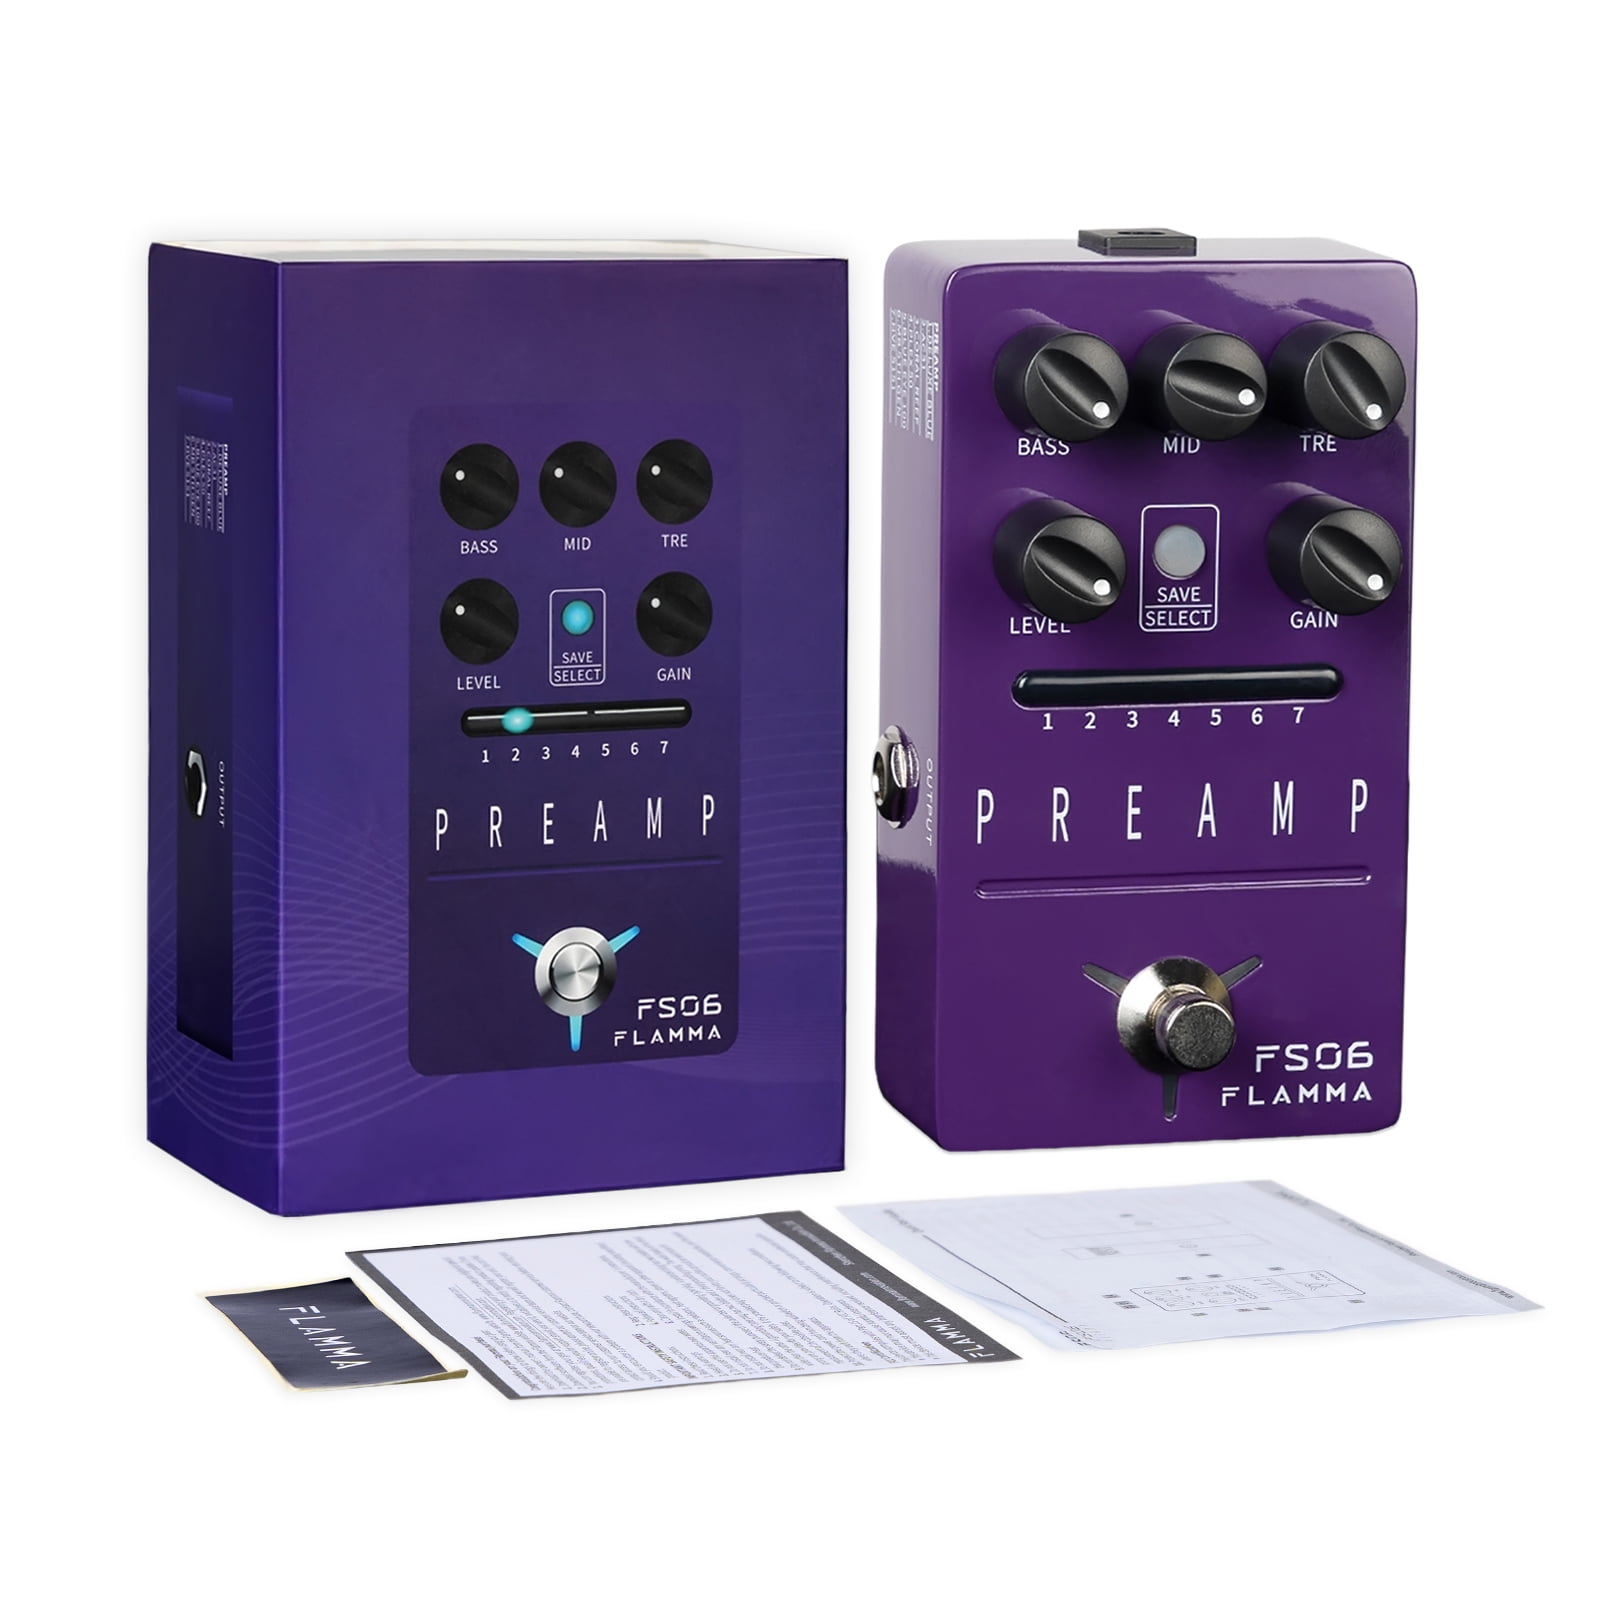 FLAMMA FS06 Digital Preamp Pedal Guitar Pedal with Bulit-in Cabinet  Simulation 7 Models Saveable Preset